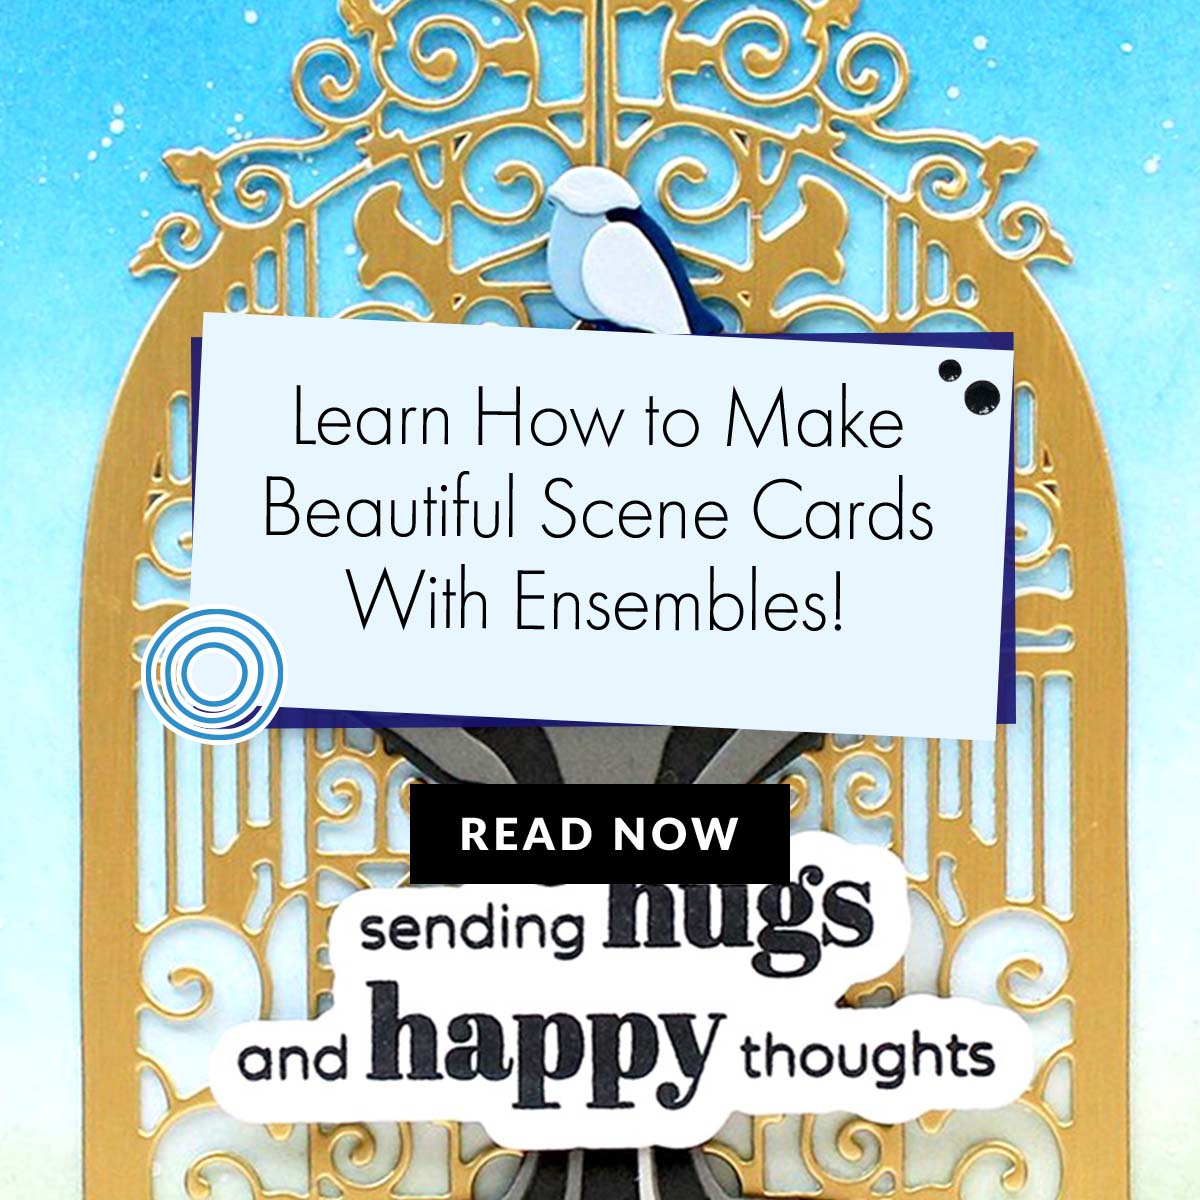 Story-Telling With Ensembles: How to Make Scenes on Cards